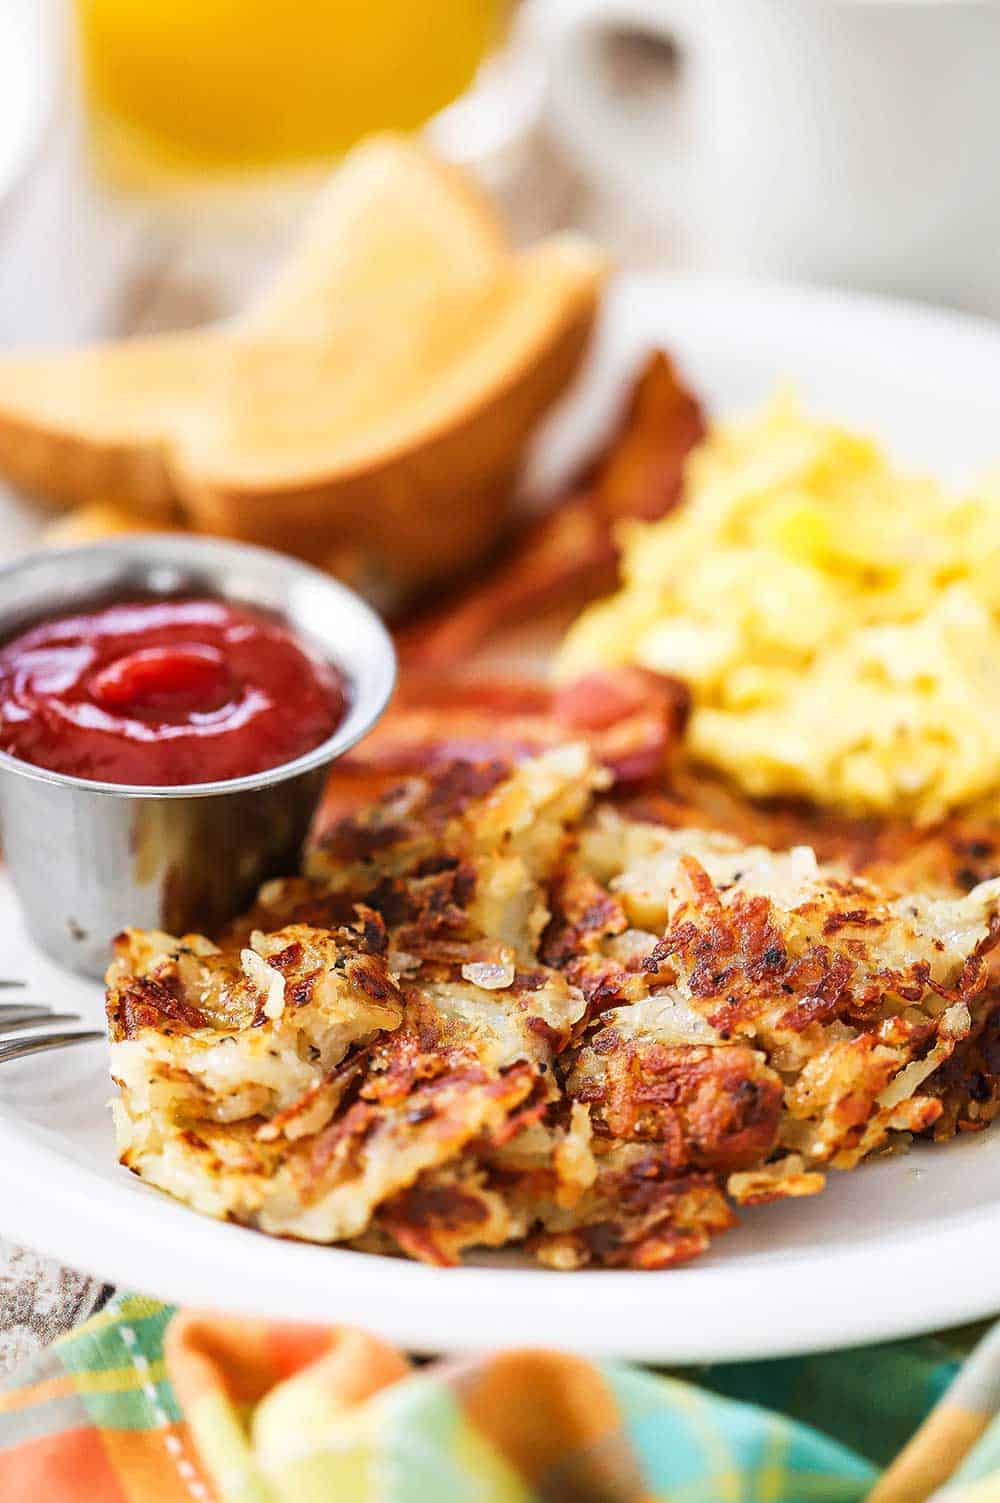 https://howtofeedaloon.com/wp-content/uploads/2023/08/plate-of-hash-browns-front-view.jpg